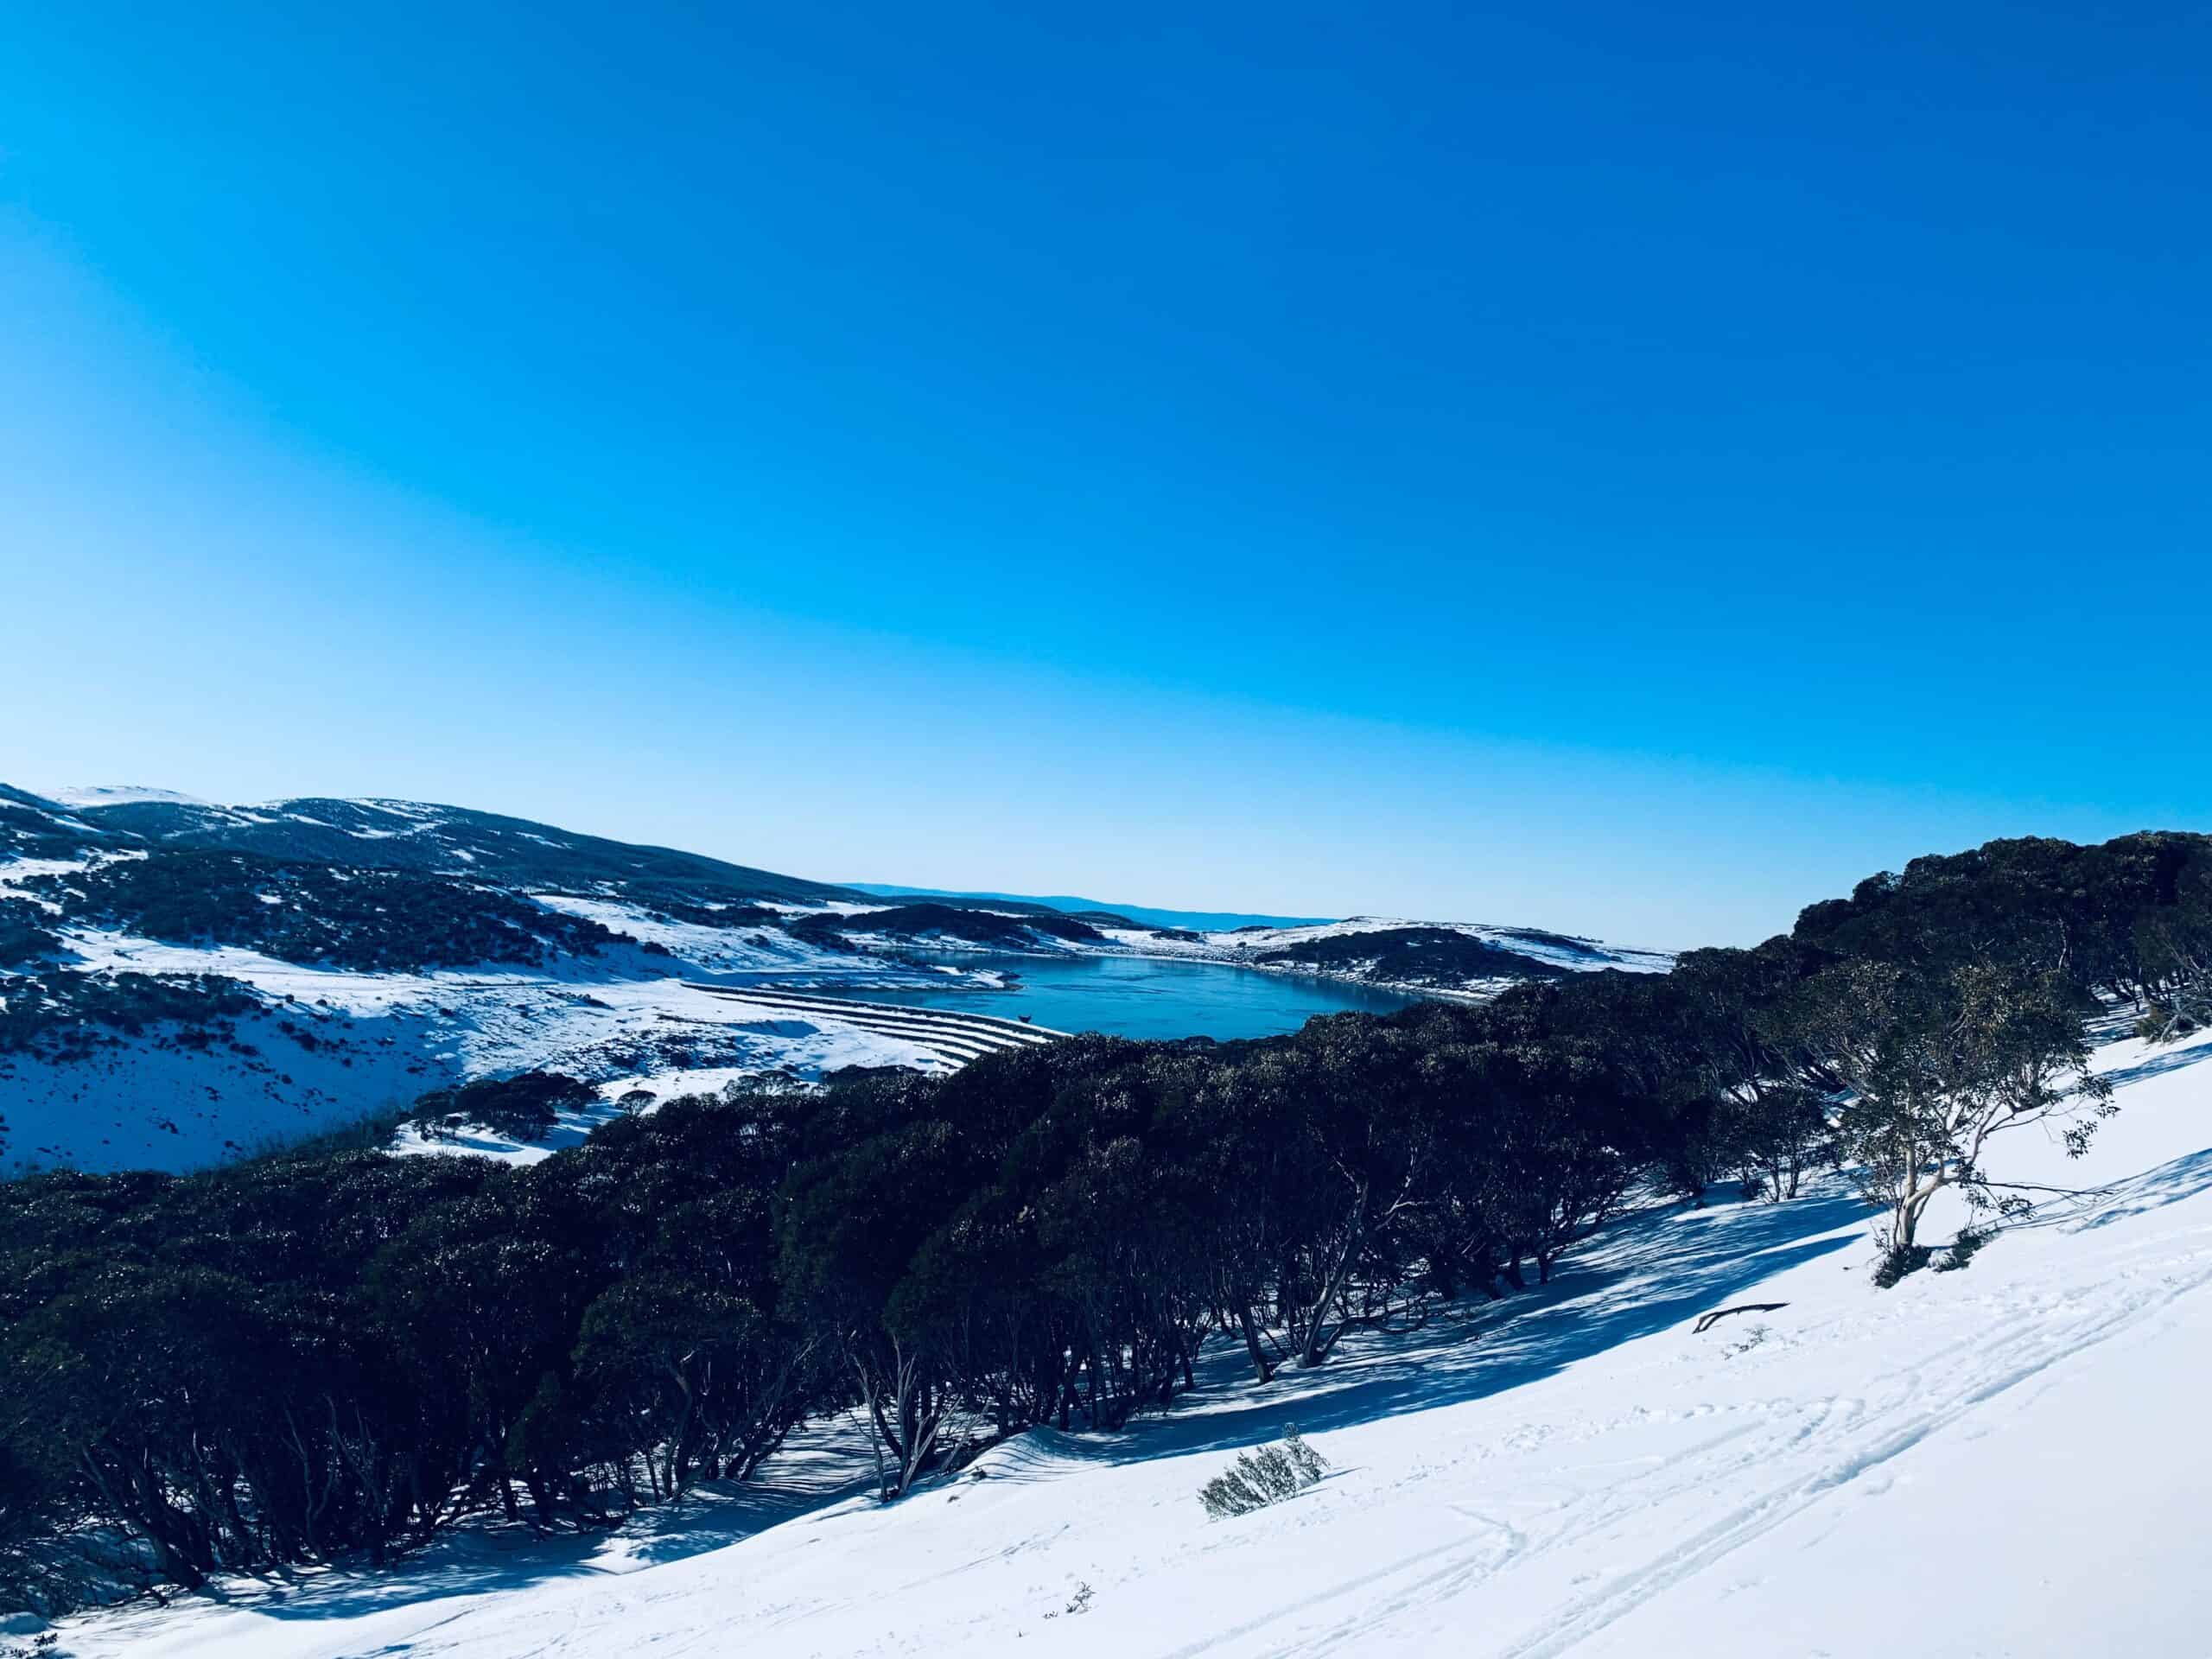 A picture of falls creek, yet again a great place to see snow in Australia